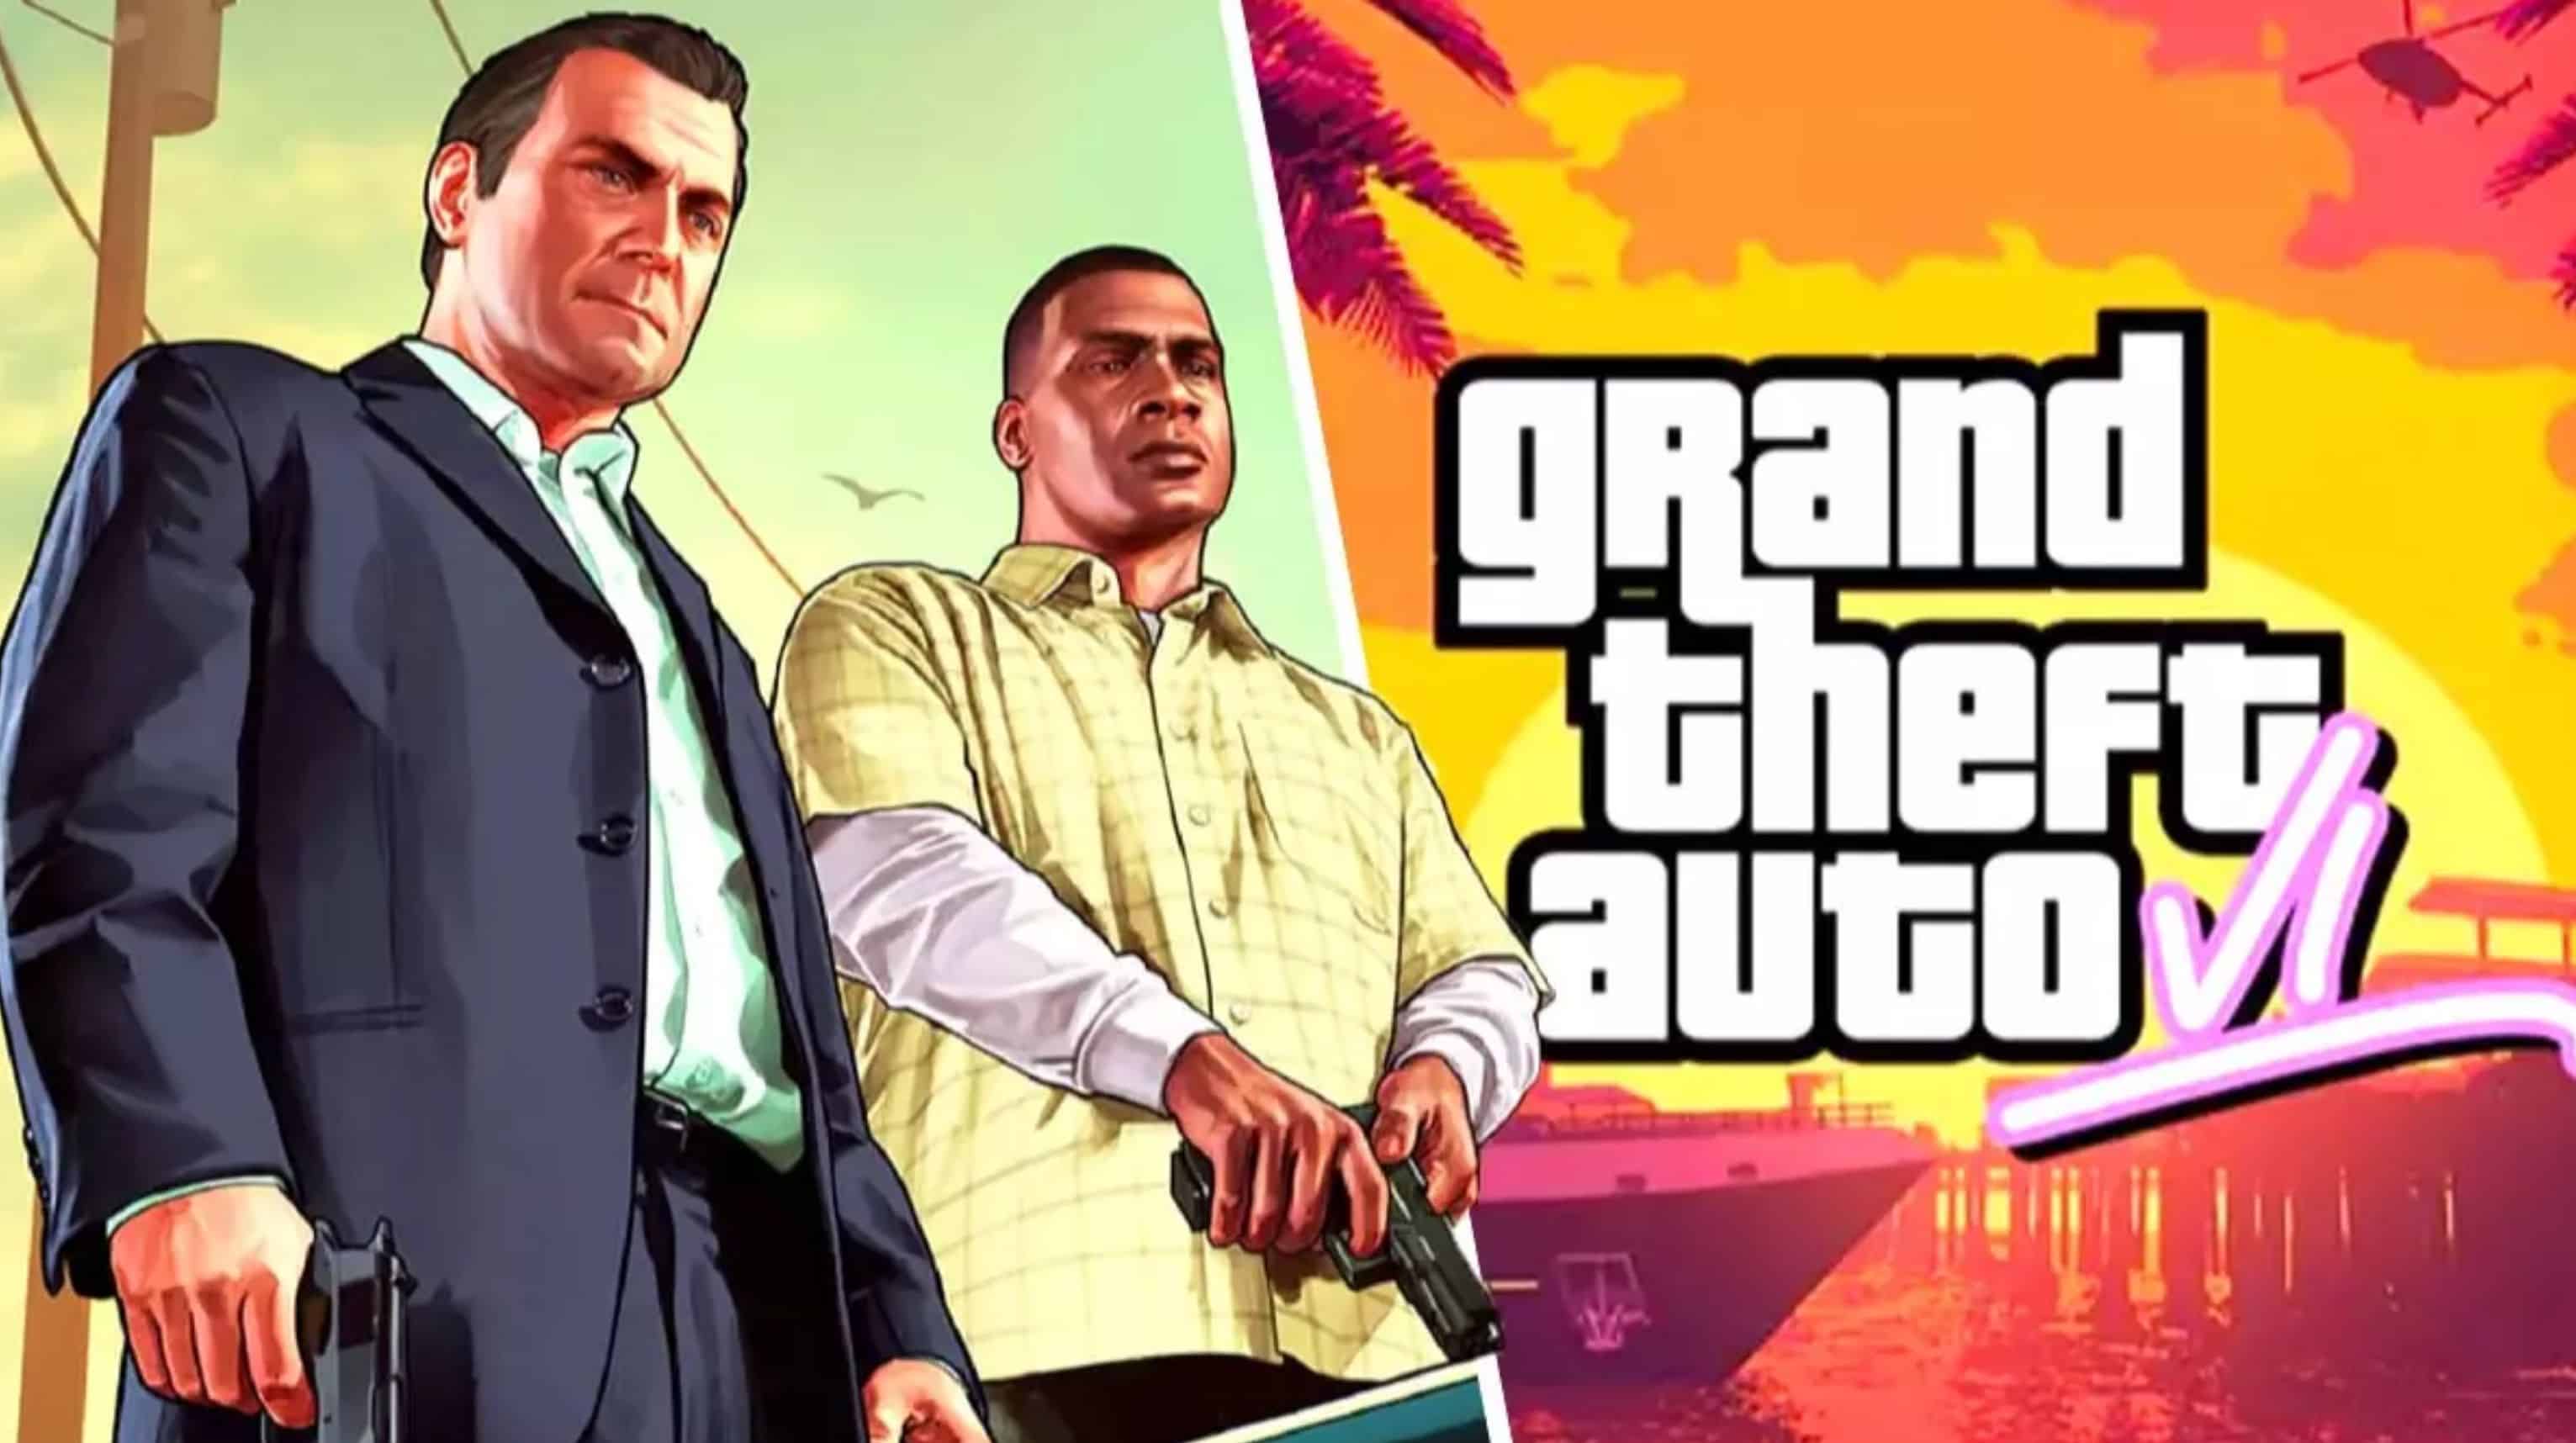 Grand Theft Auto 6 Trailer Leaks Early, Announcing 2025 Release - The New  York Times